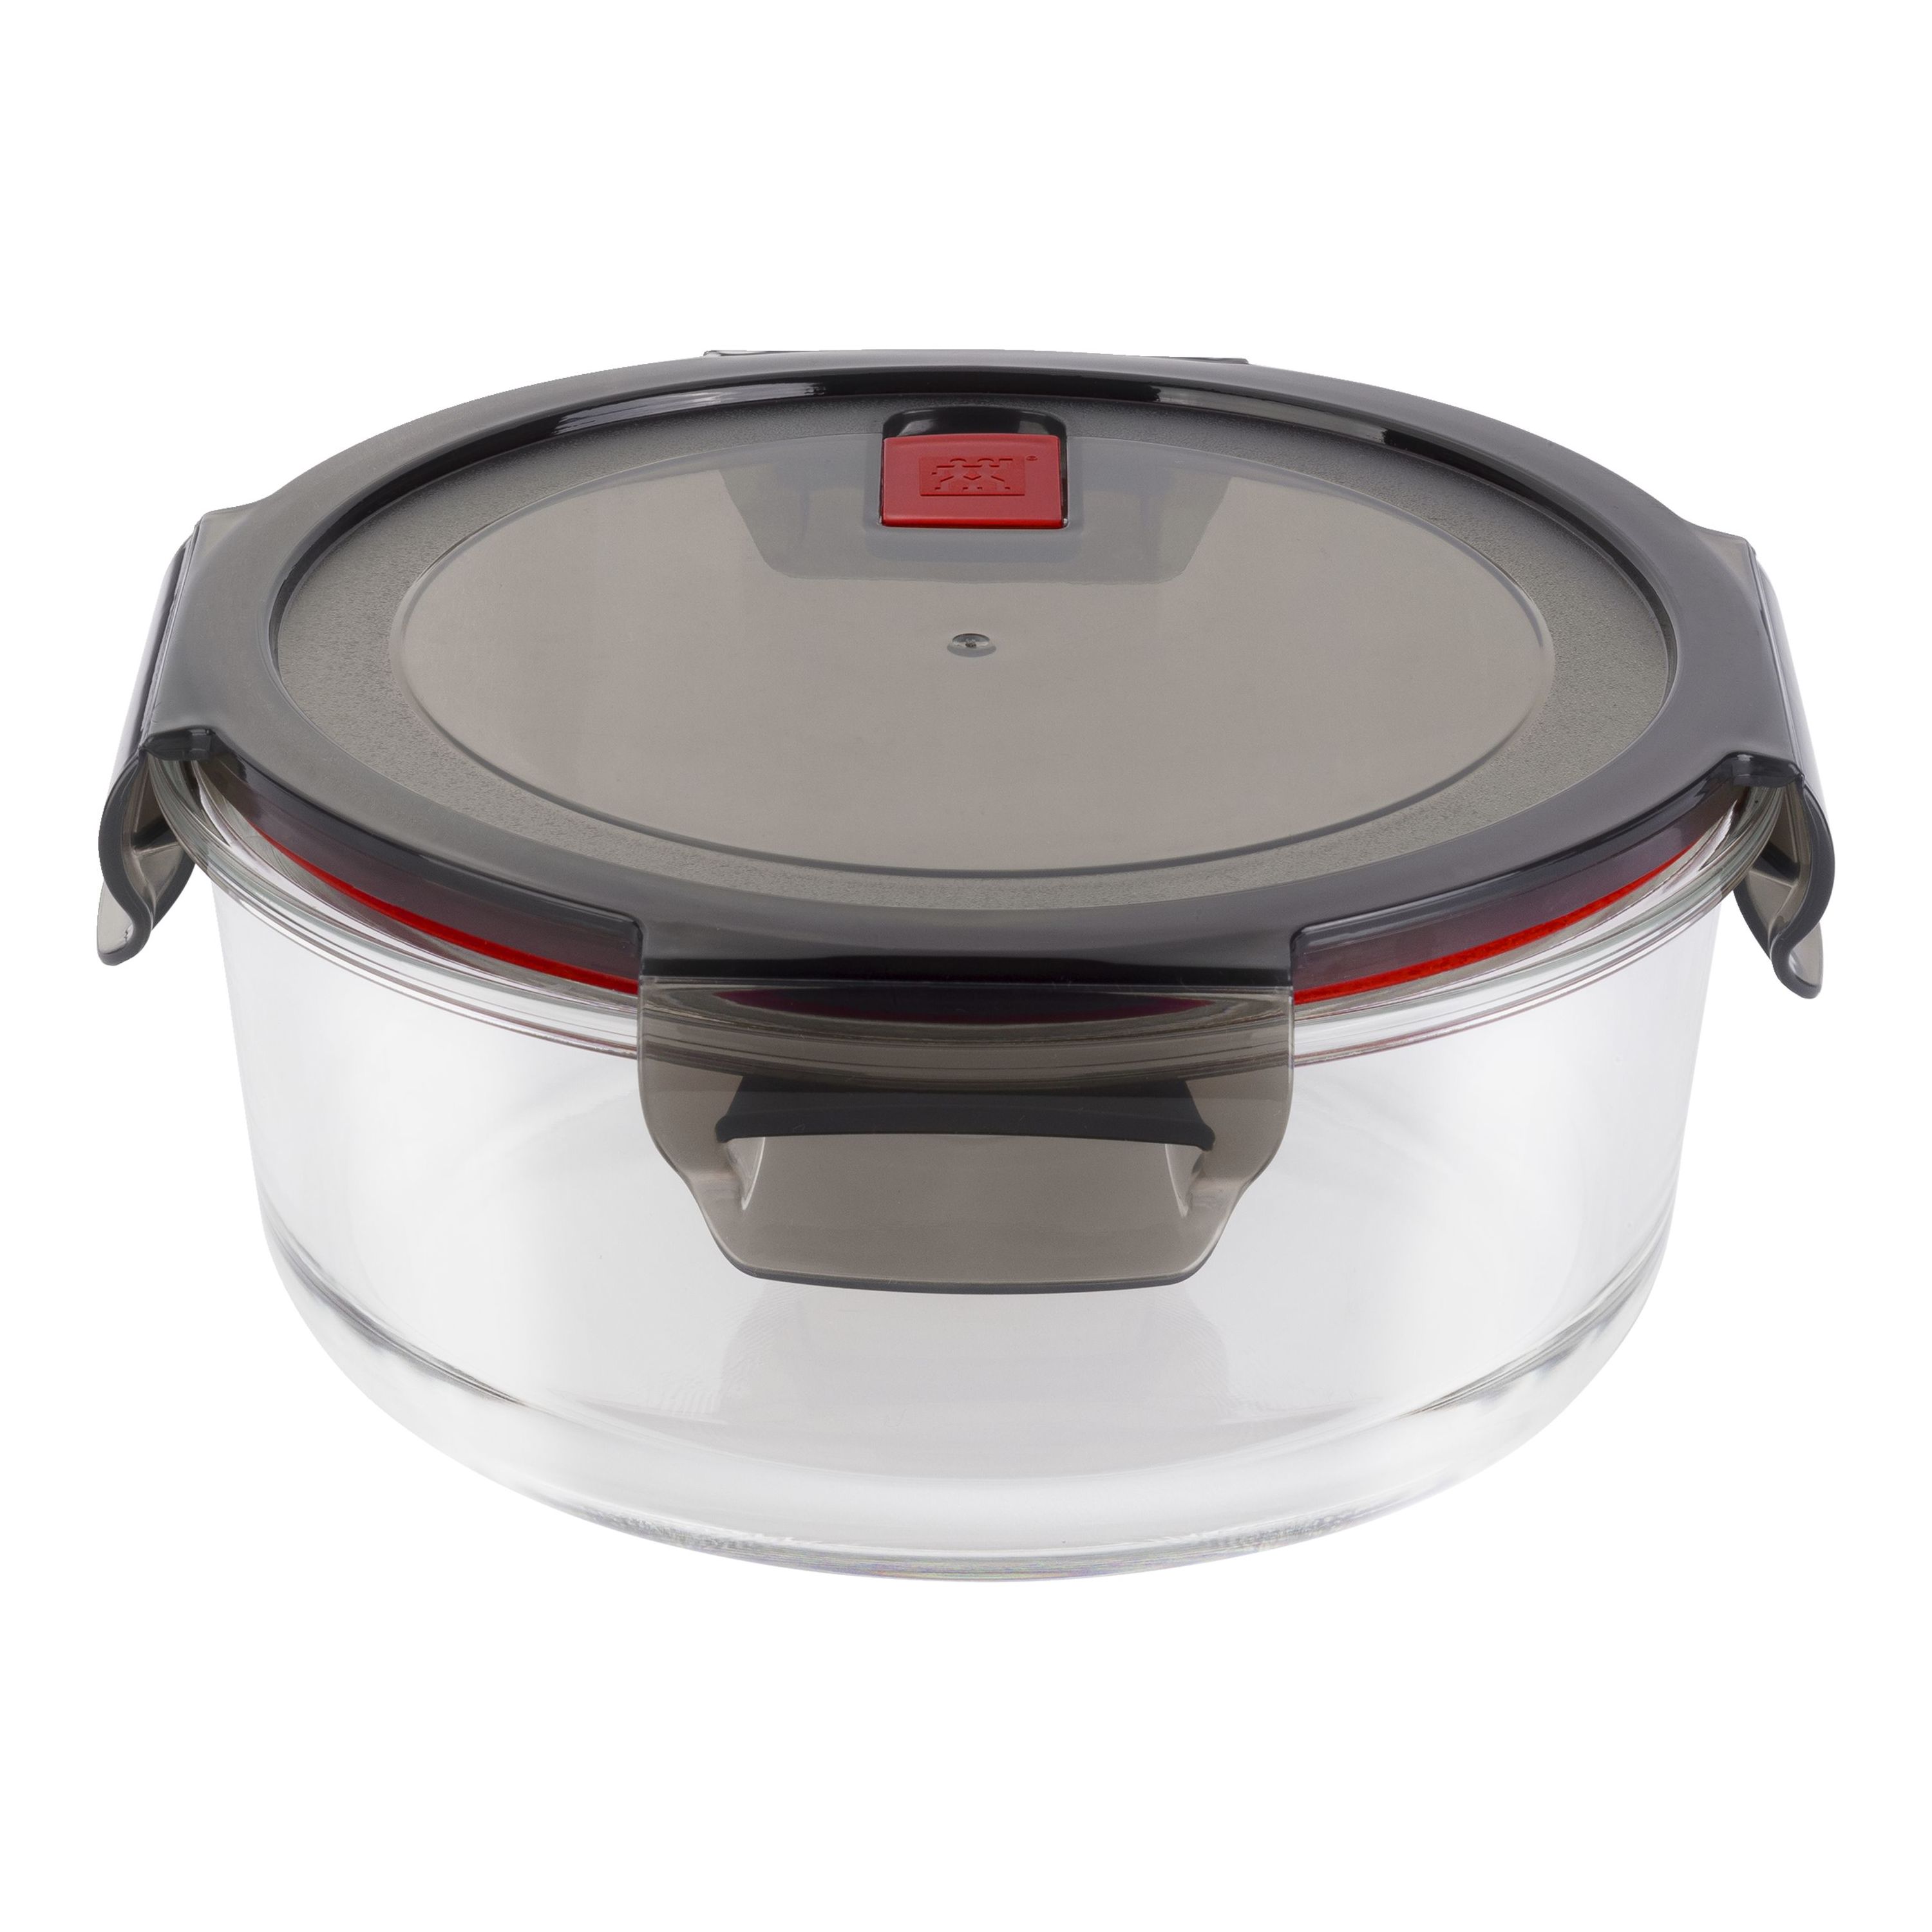 Food storage container GUSTO 1,3 l, Zwilling 